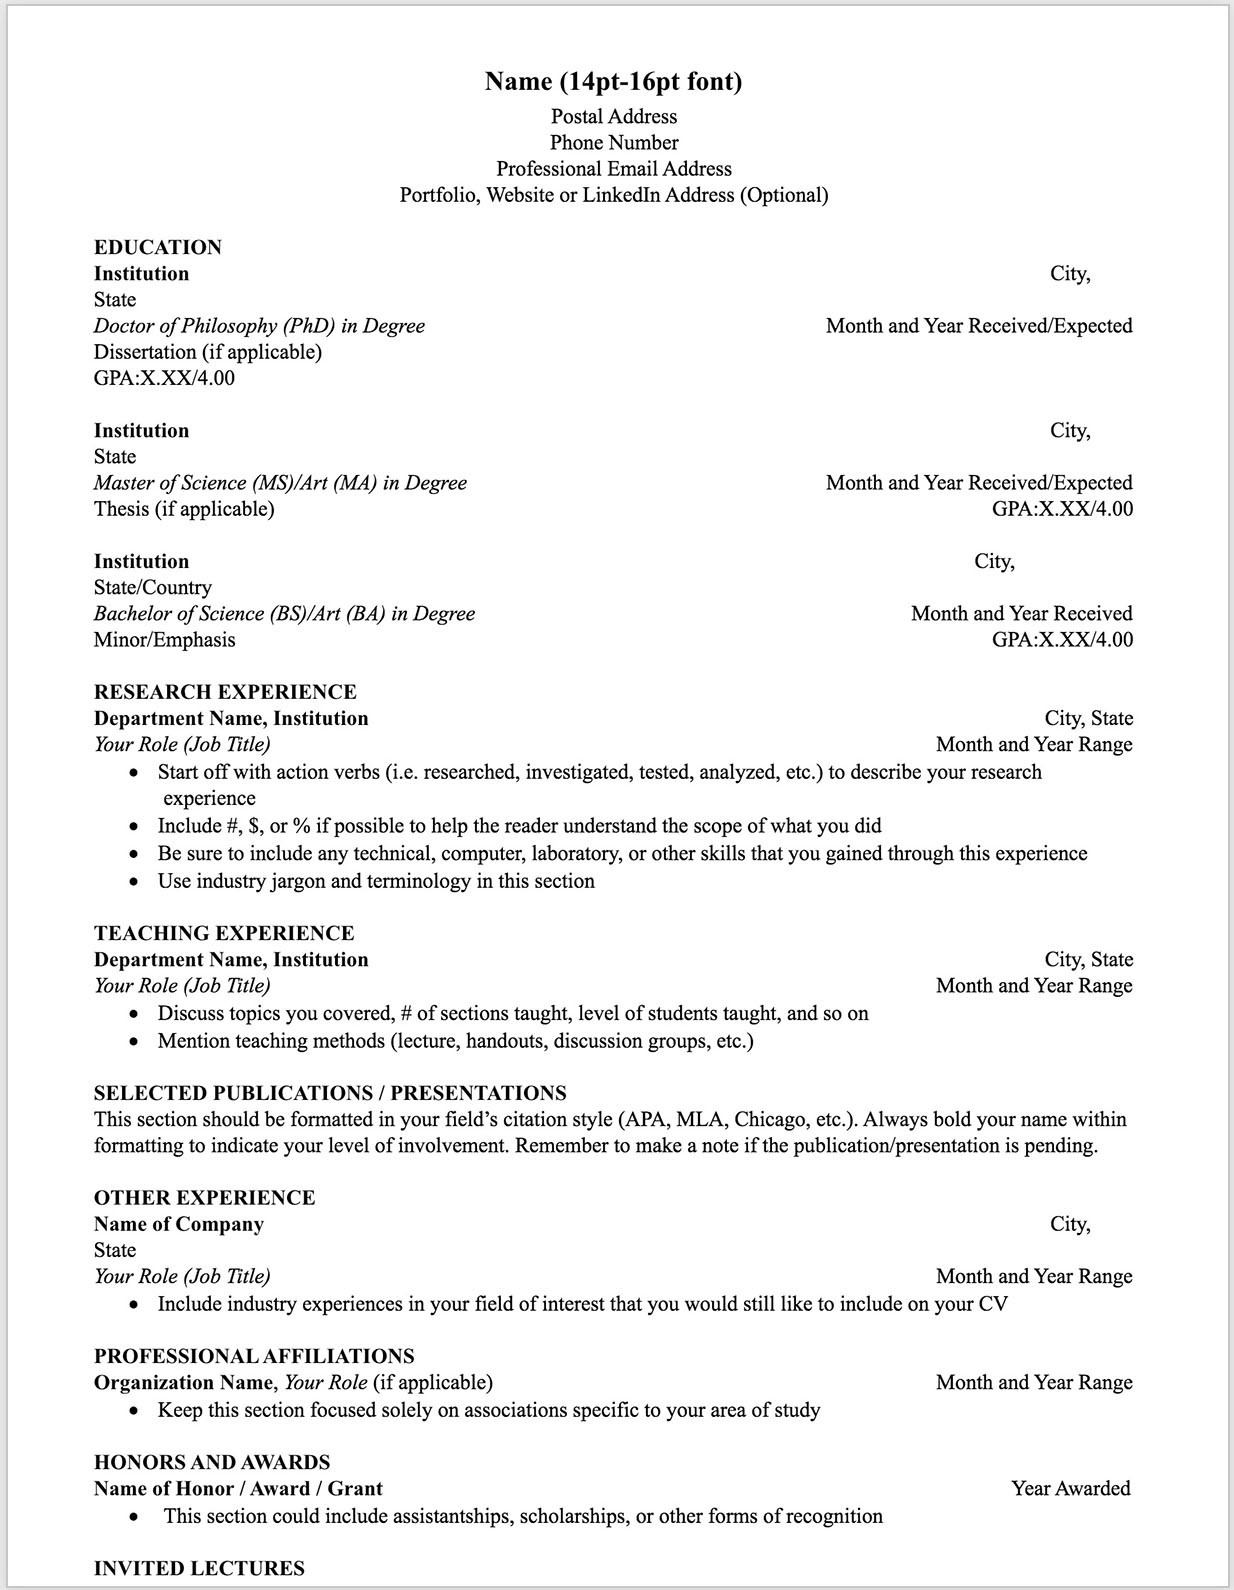 Sample Resume with Bachelors and Masters Degrees Uga Career Center